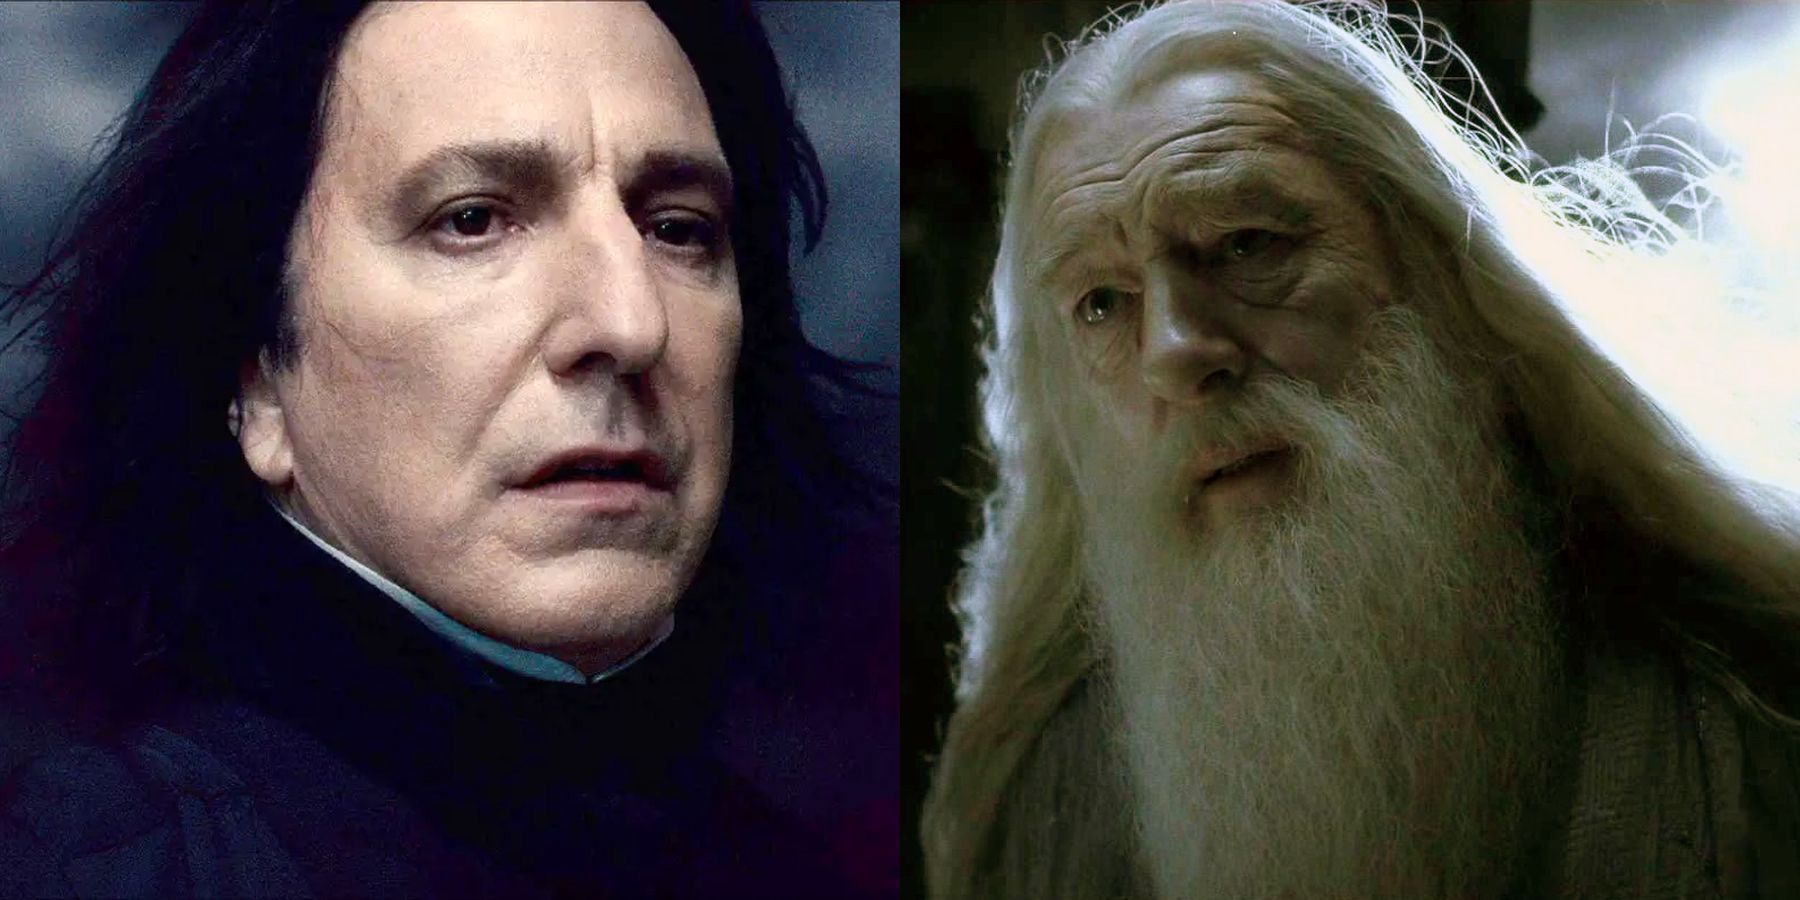 Snape and Dumblledore